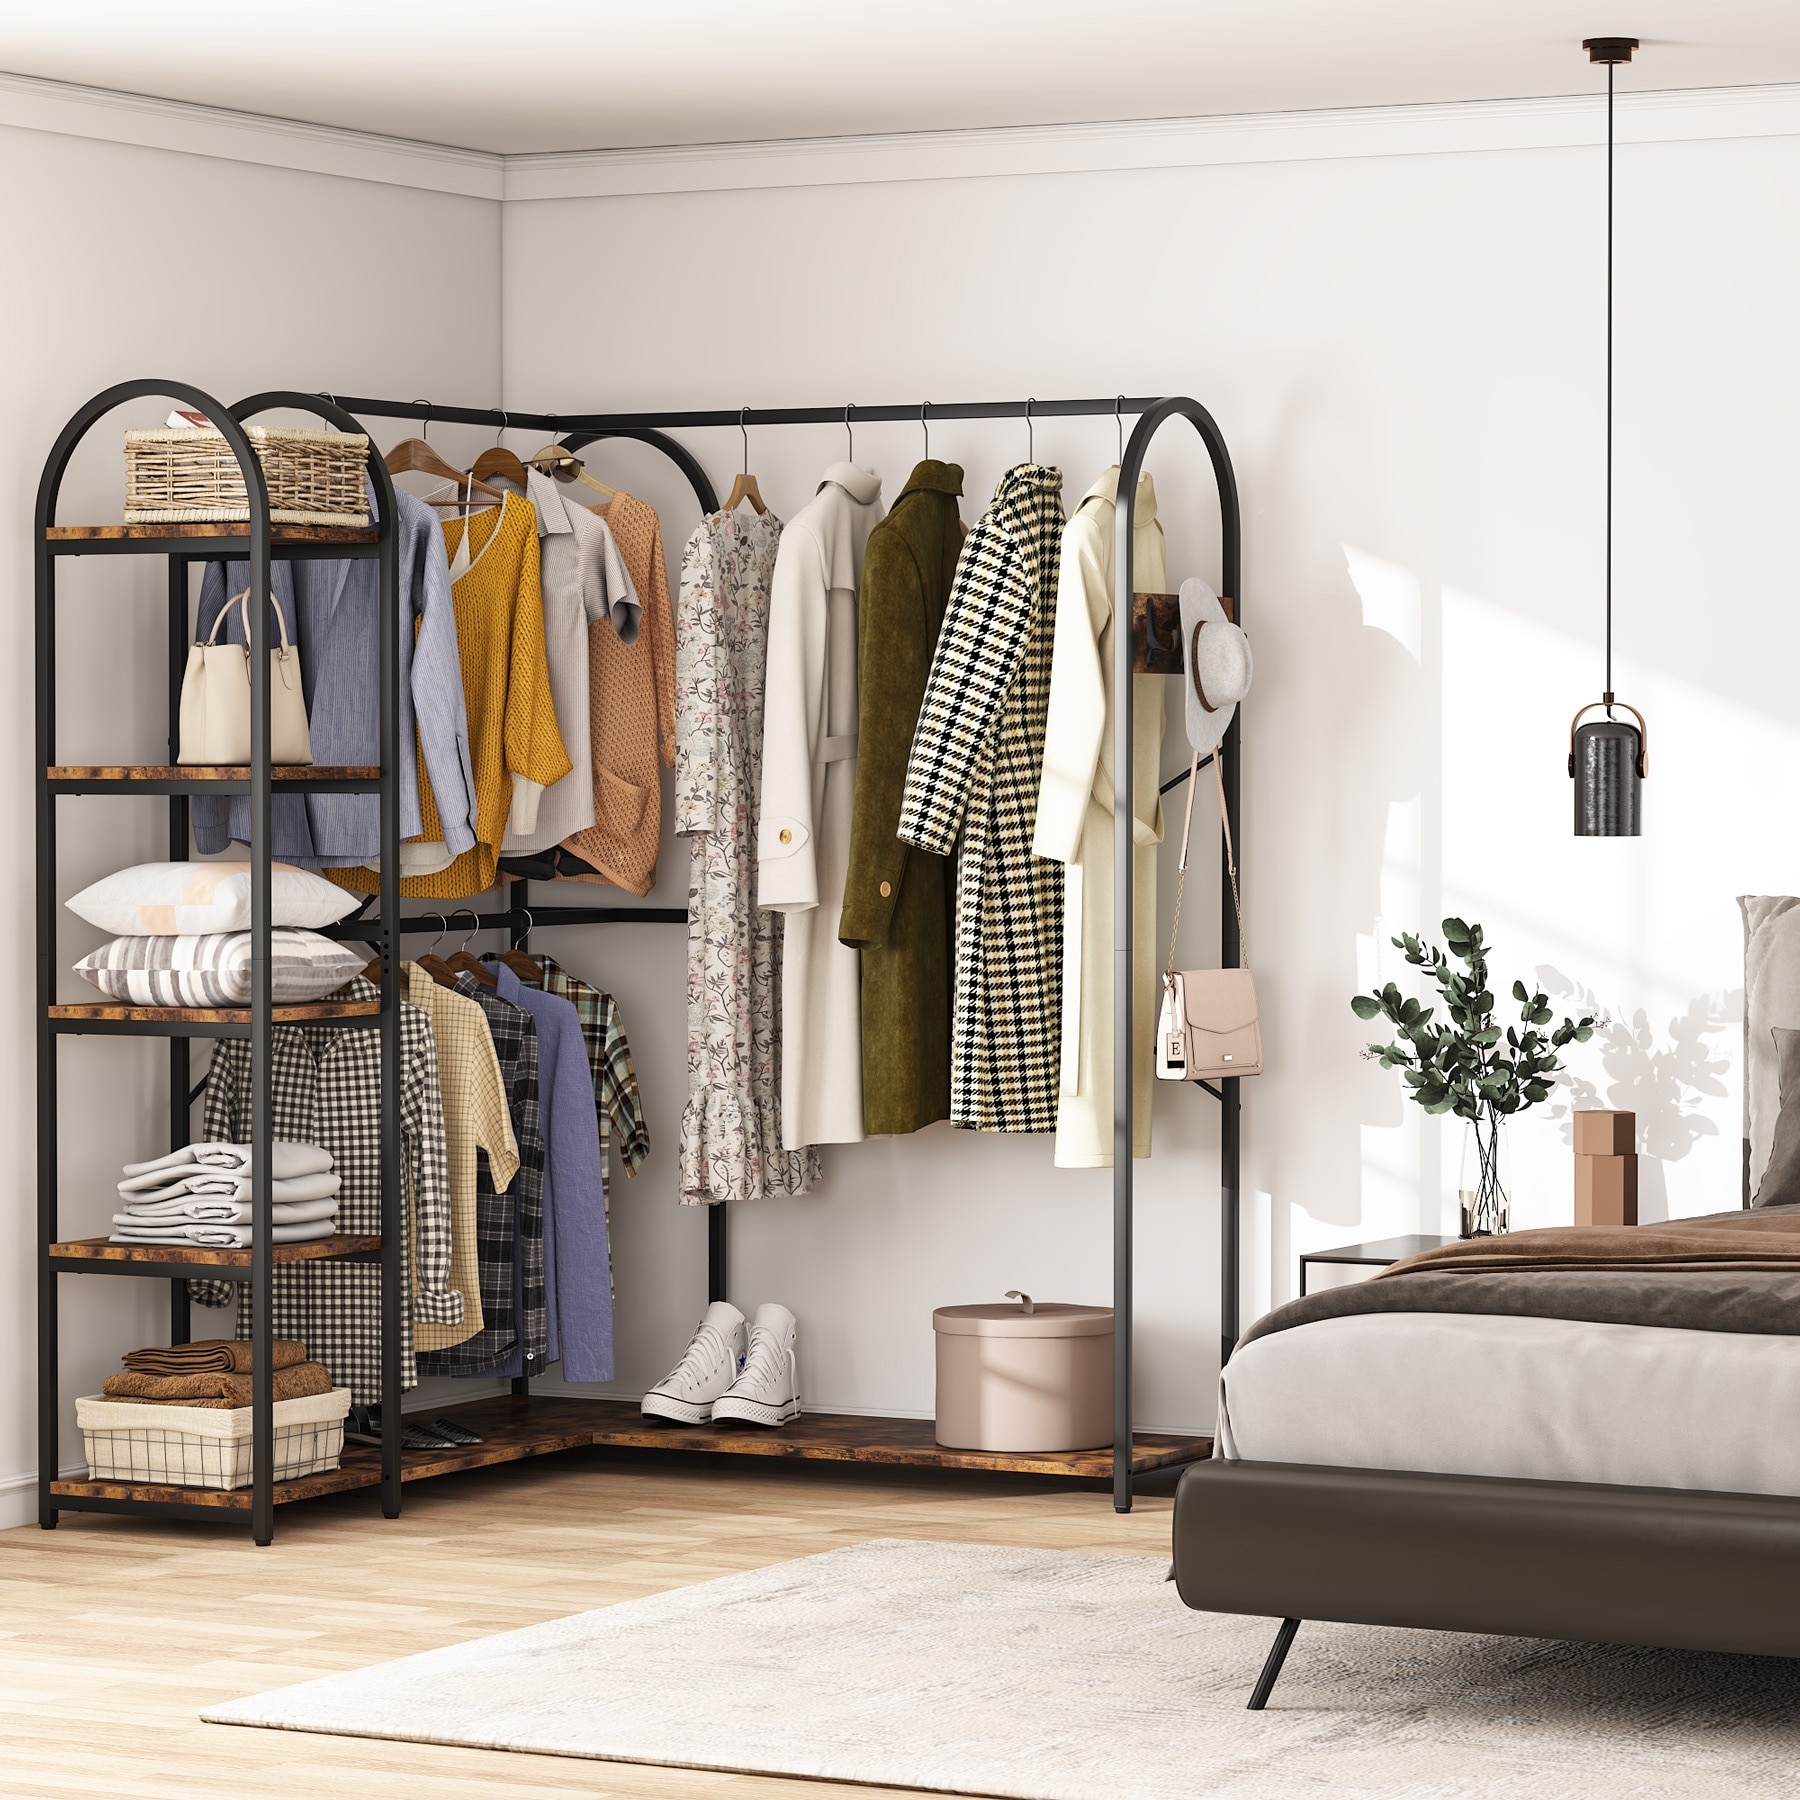 https://ak1.ostkcdn.com/images/products/is/images/direct/d3a83e85e4262a12112baf8ec2c585c181491b44/Heavy-Duty-L-Shape-Clothes-Rack%2CFreestanding-Corner-Closet-Organizer%2CLarge-Garment-Rack-with-Storage-Shelves-and-Hanging-Rods.jpg